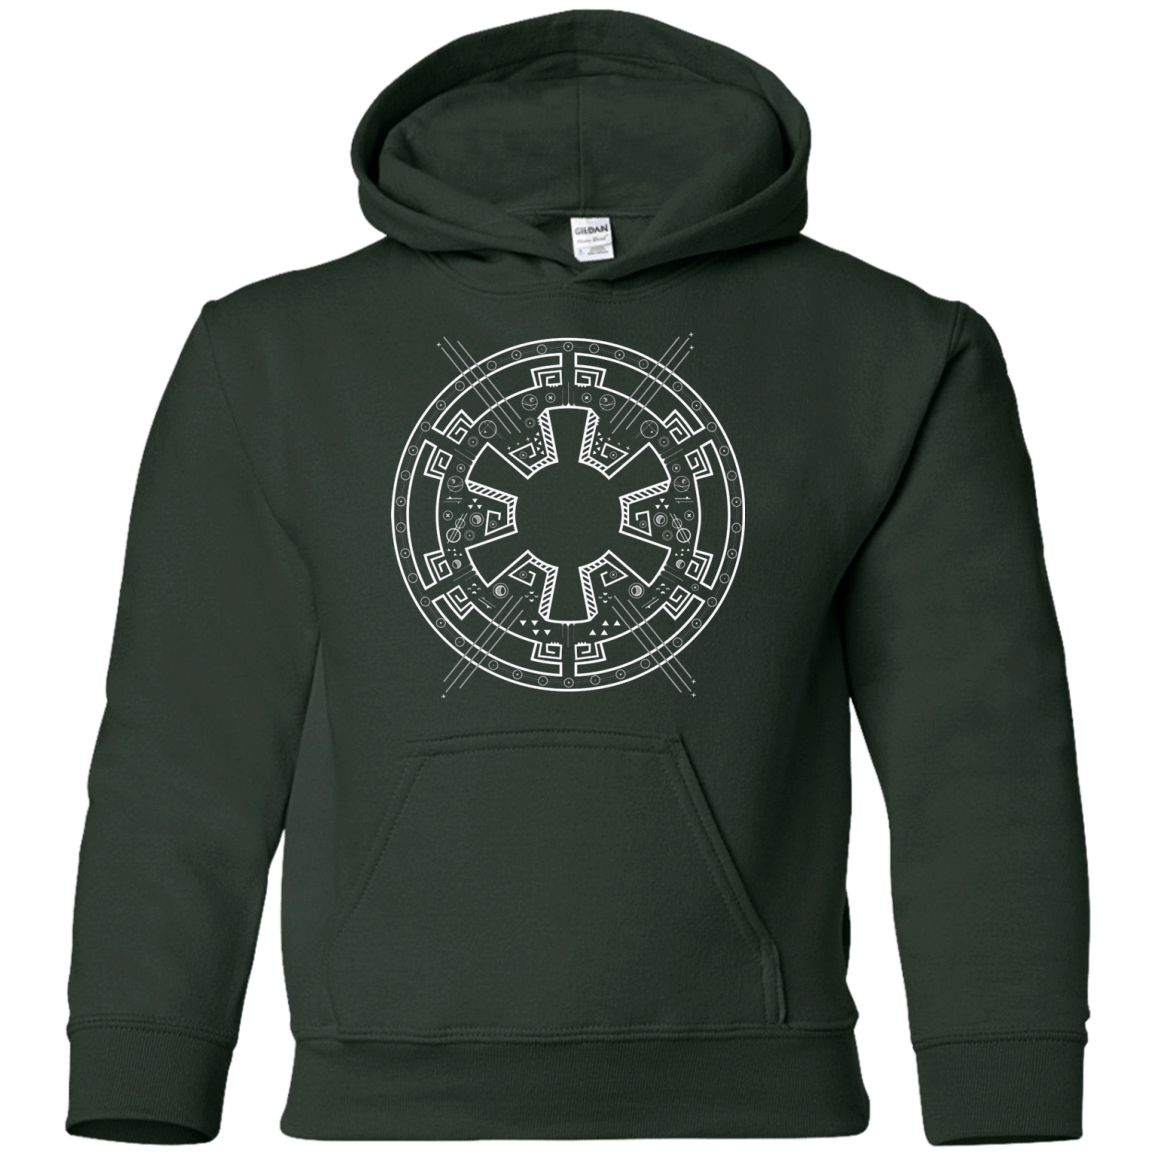 Sweatshirts Forest Green / YS Tech empire Youth Hoodie